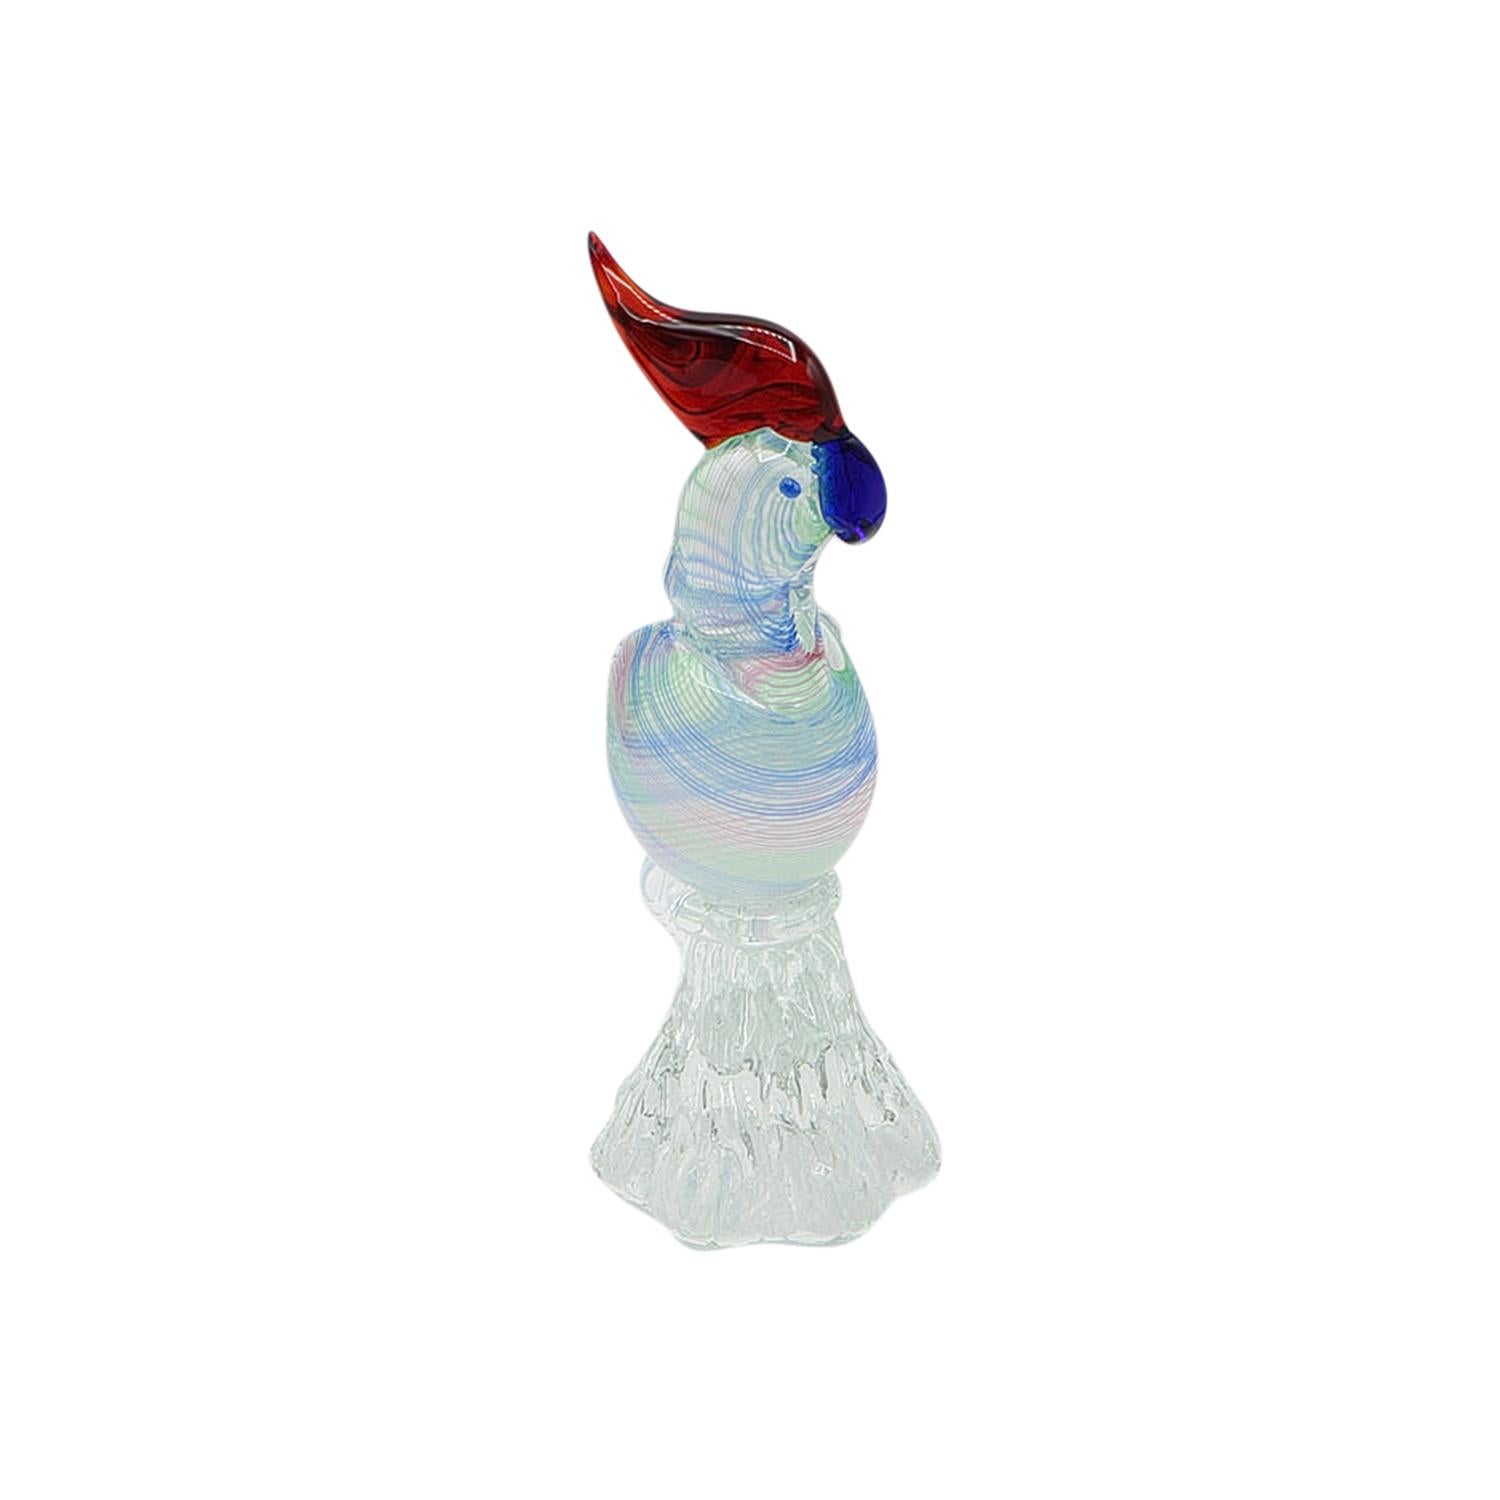 A blue-red vintage Mid-Century Modern Italian parrot sculpture made of hand blown Murano Glass, designed and produced by Archimede Seguso in good condition. The décor piece is particularized by multicolored details. Wear consistent with age and use.